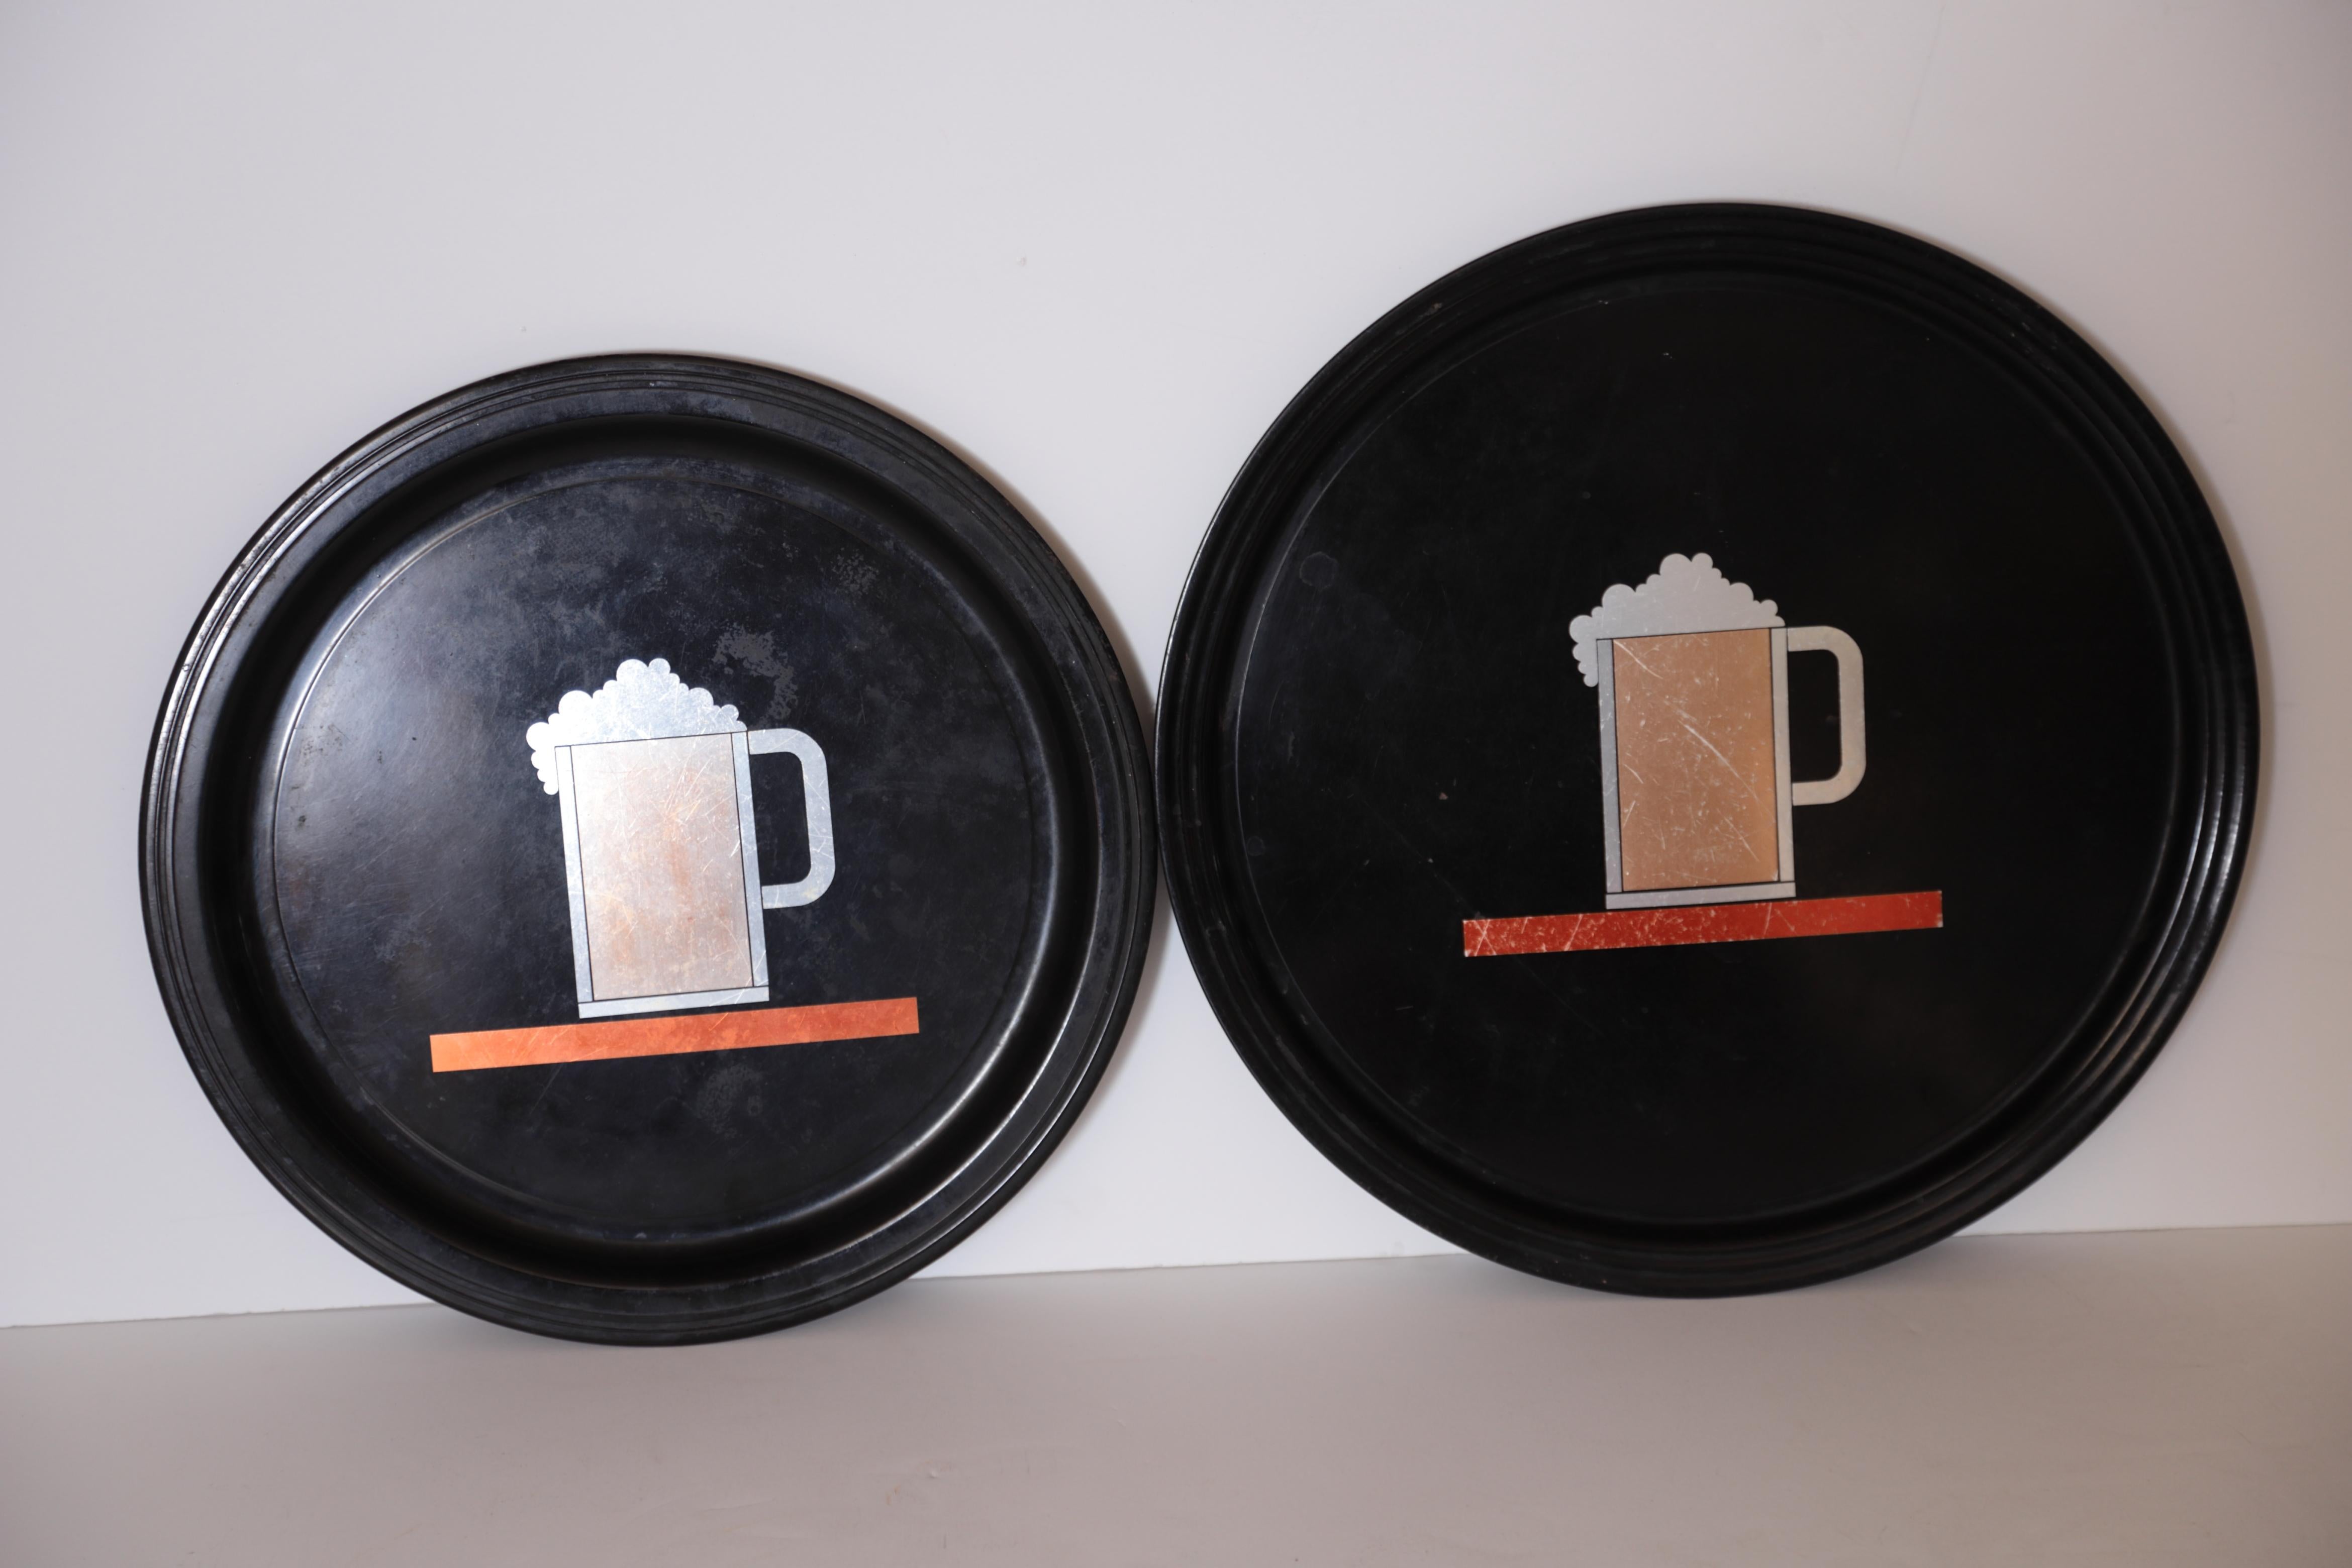 Machine Age Art Deco Westinghouse Micarta and Anodized aluminum beer trays pair

Likely the rarest of the Iconic inlaid Micarta Trays, rarely seen examples in two large sizes: 15 inch and 13.5 inch diameters.
Unknown George Switzer or Donald